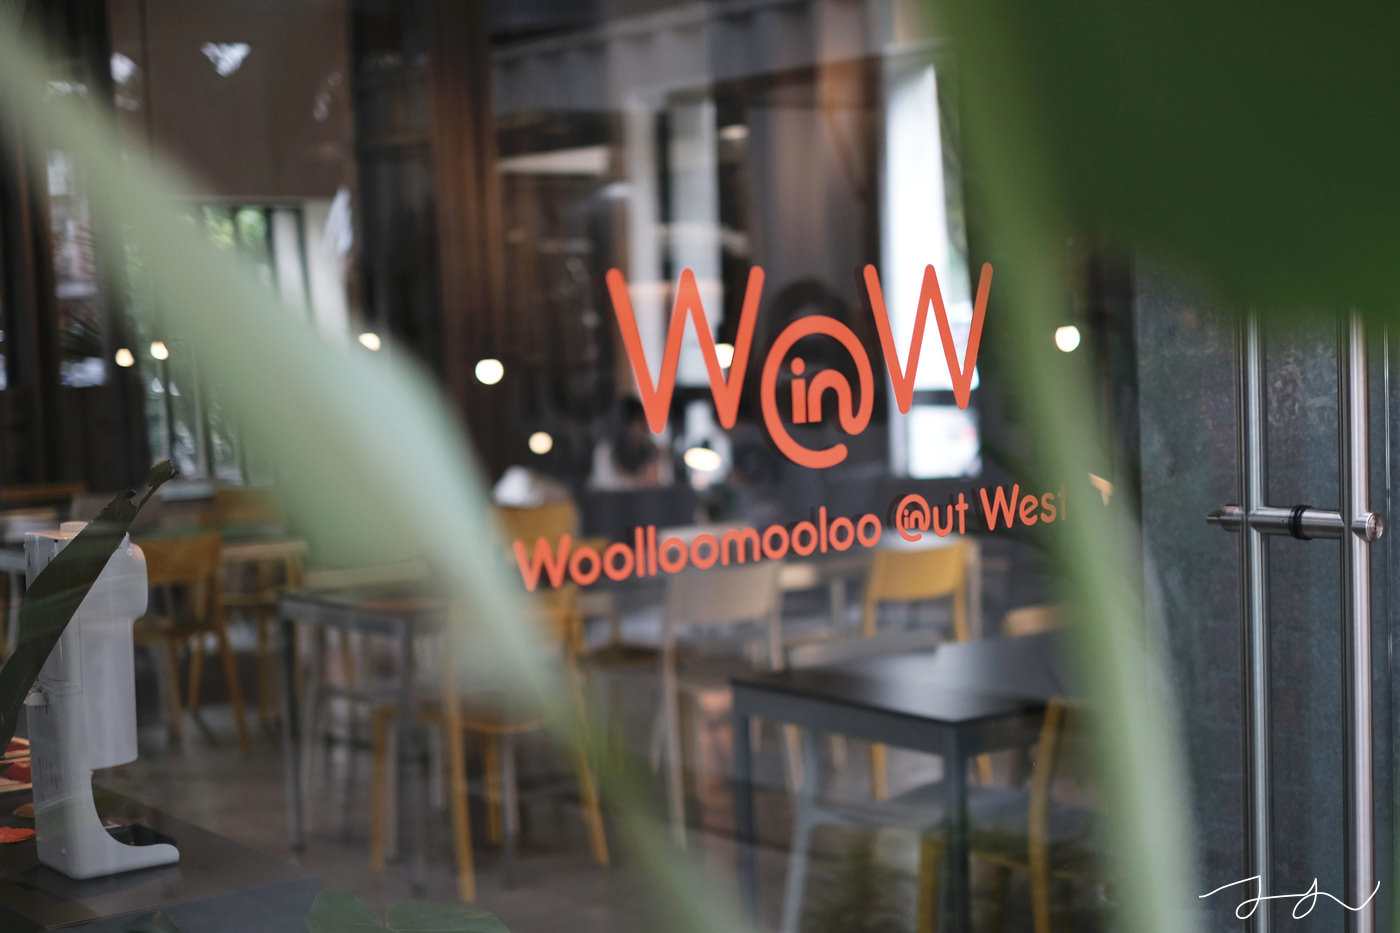 Woolloomooloo+in out West